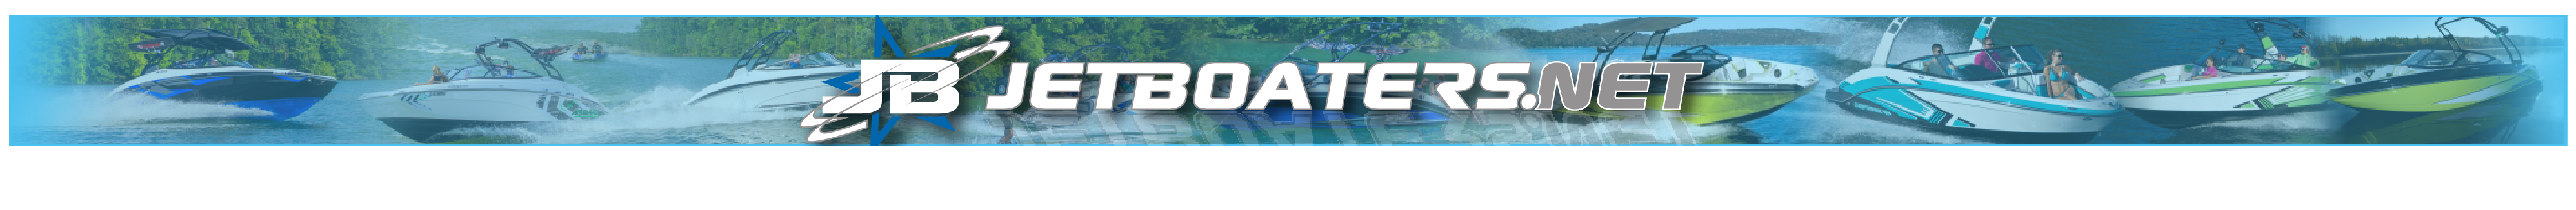 JetBoaters.net - The World's Largest Jet Boat Forum!